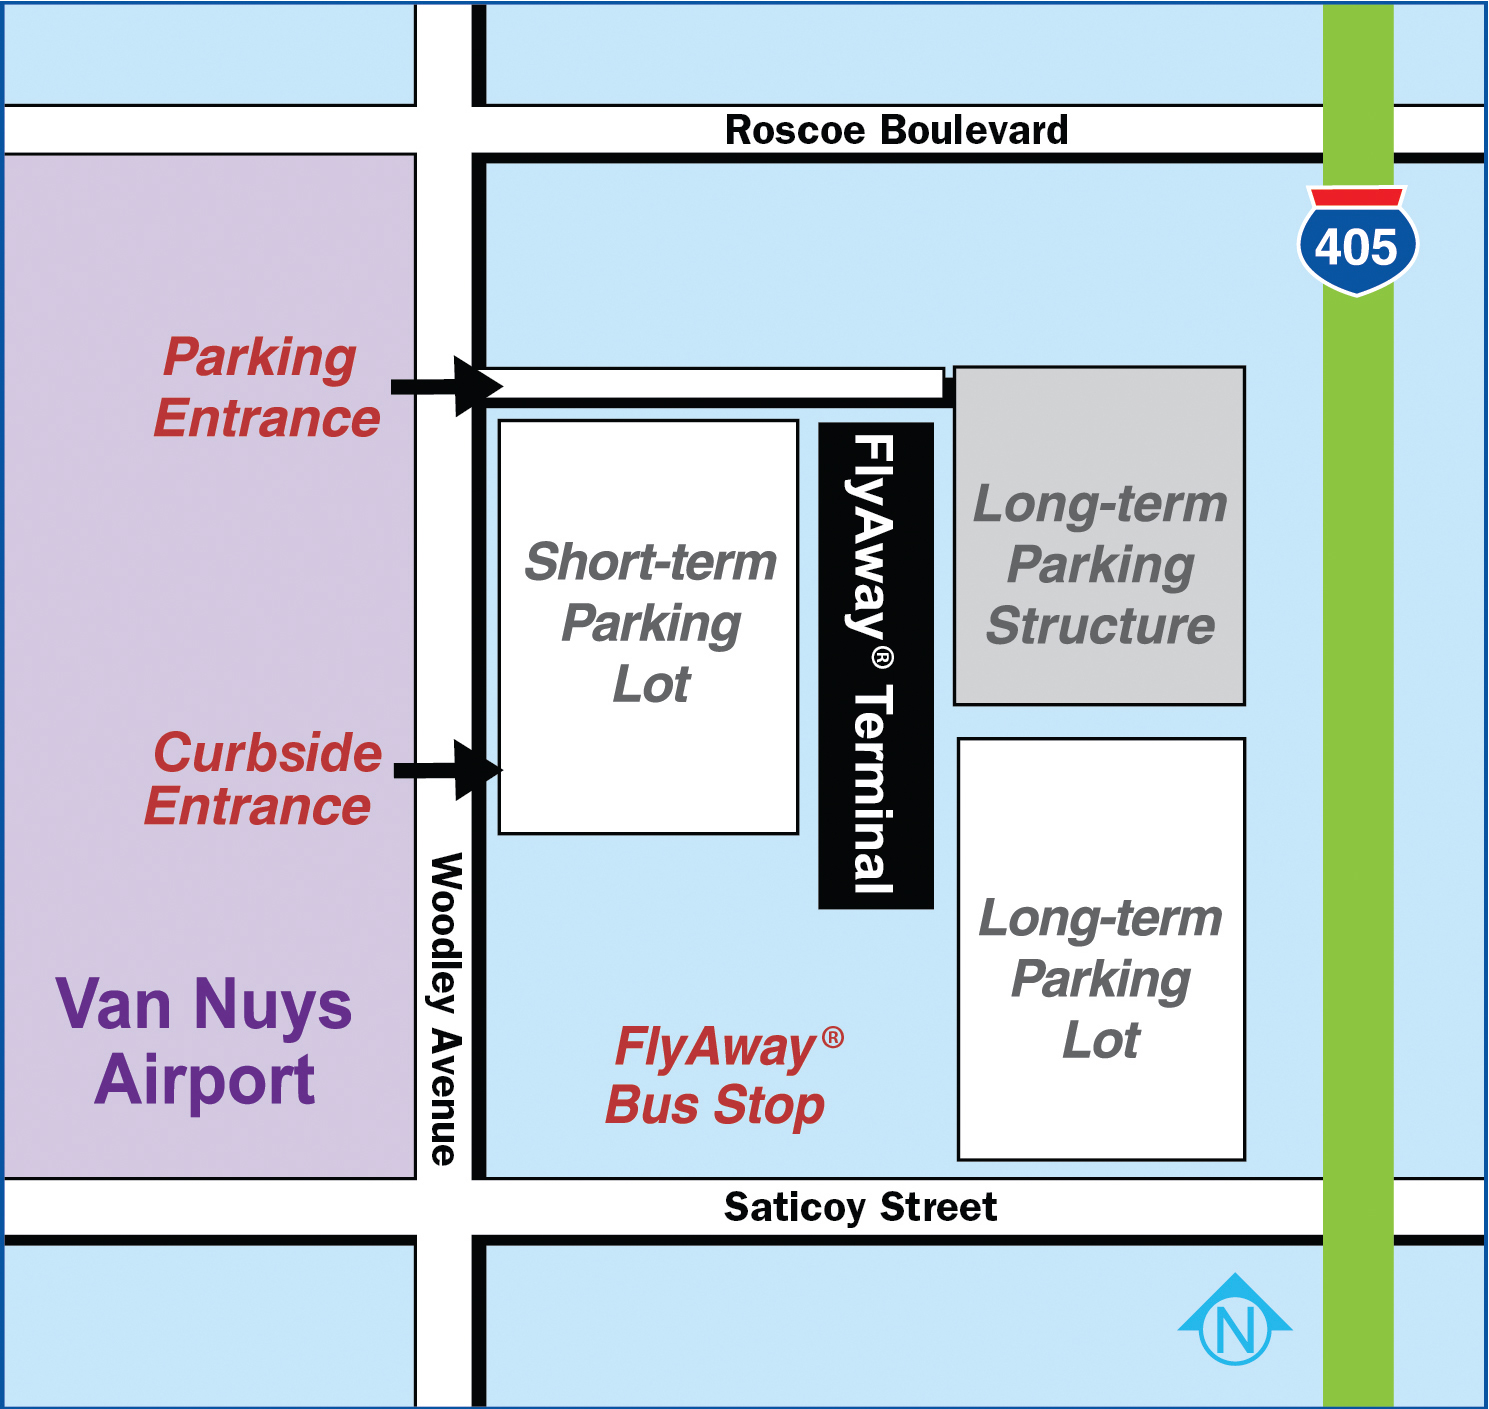 LAX Official Website Traffic and Ground Transportation FlyAway Bus